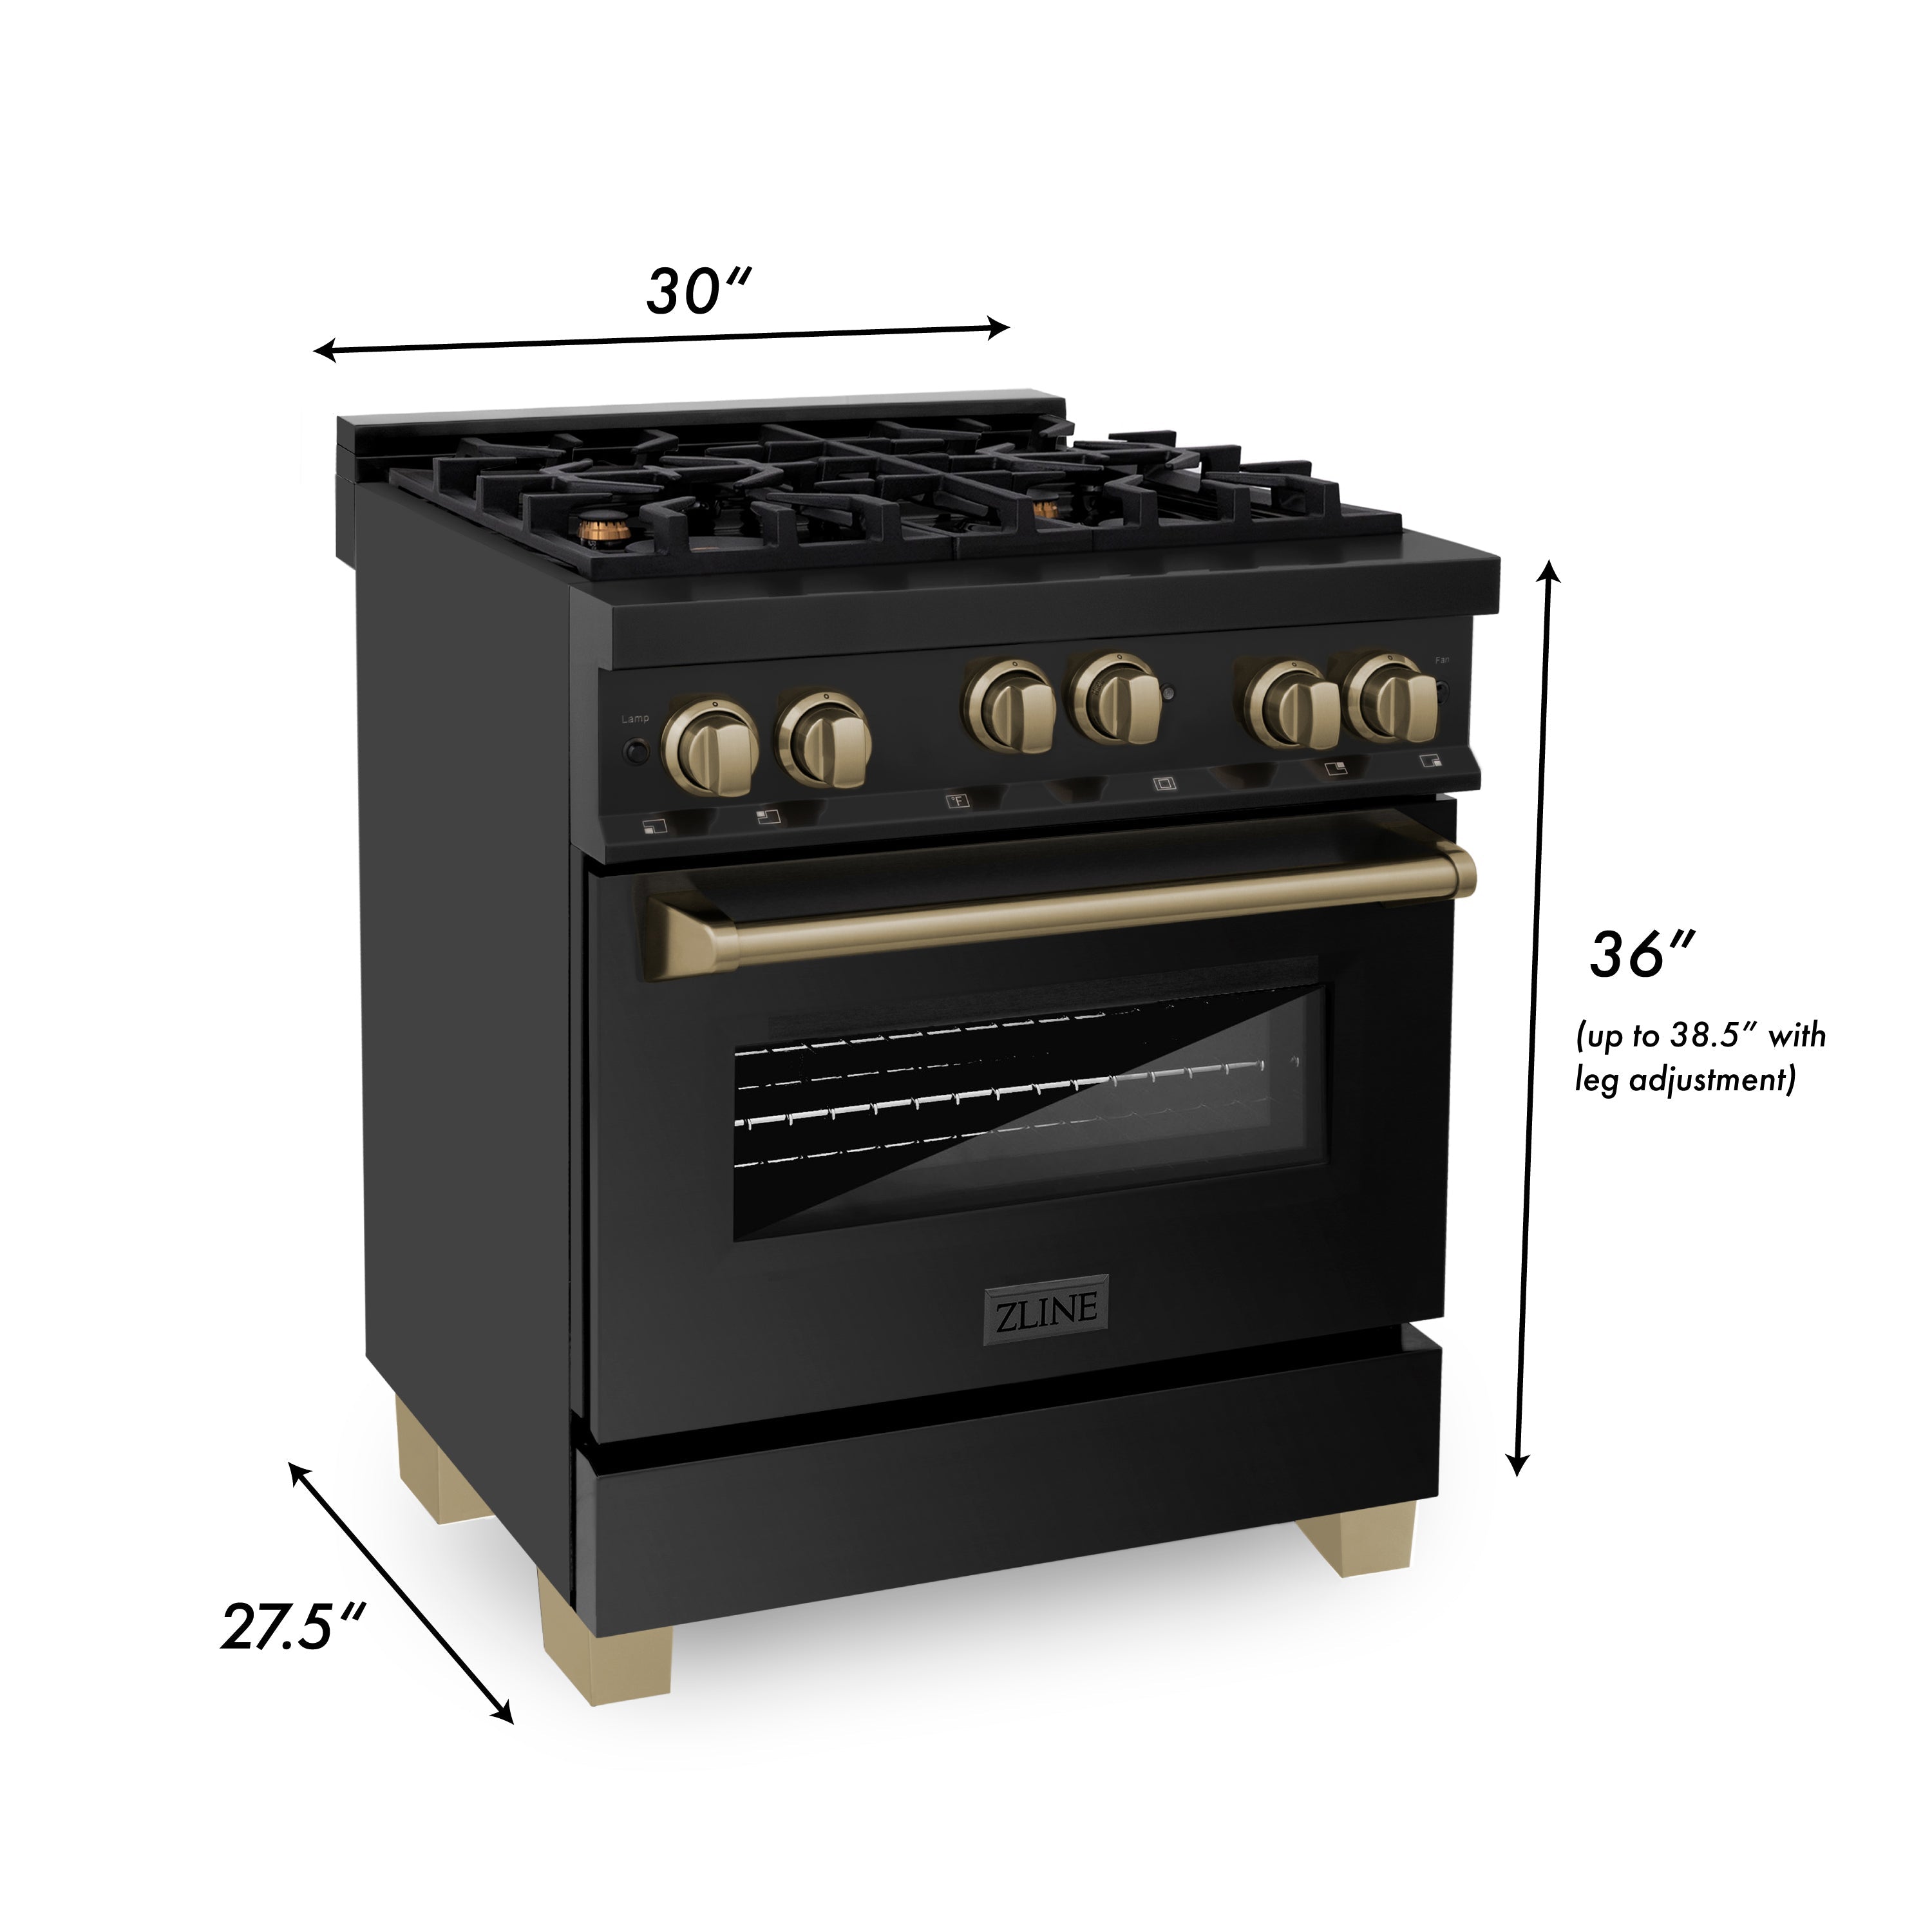 ZLINE Autograph Edition 30 in. 4.0 cu. ft. Range with Gas Stove and Gas Oven in Black Stainless Steel with Accents (RGBZ-30)